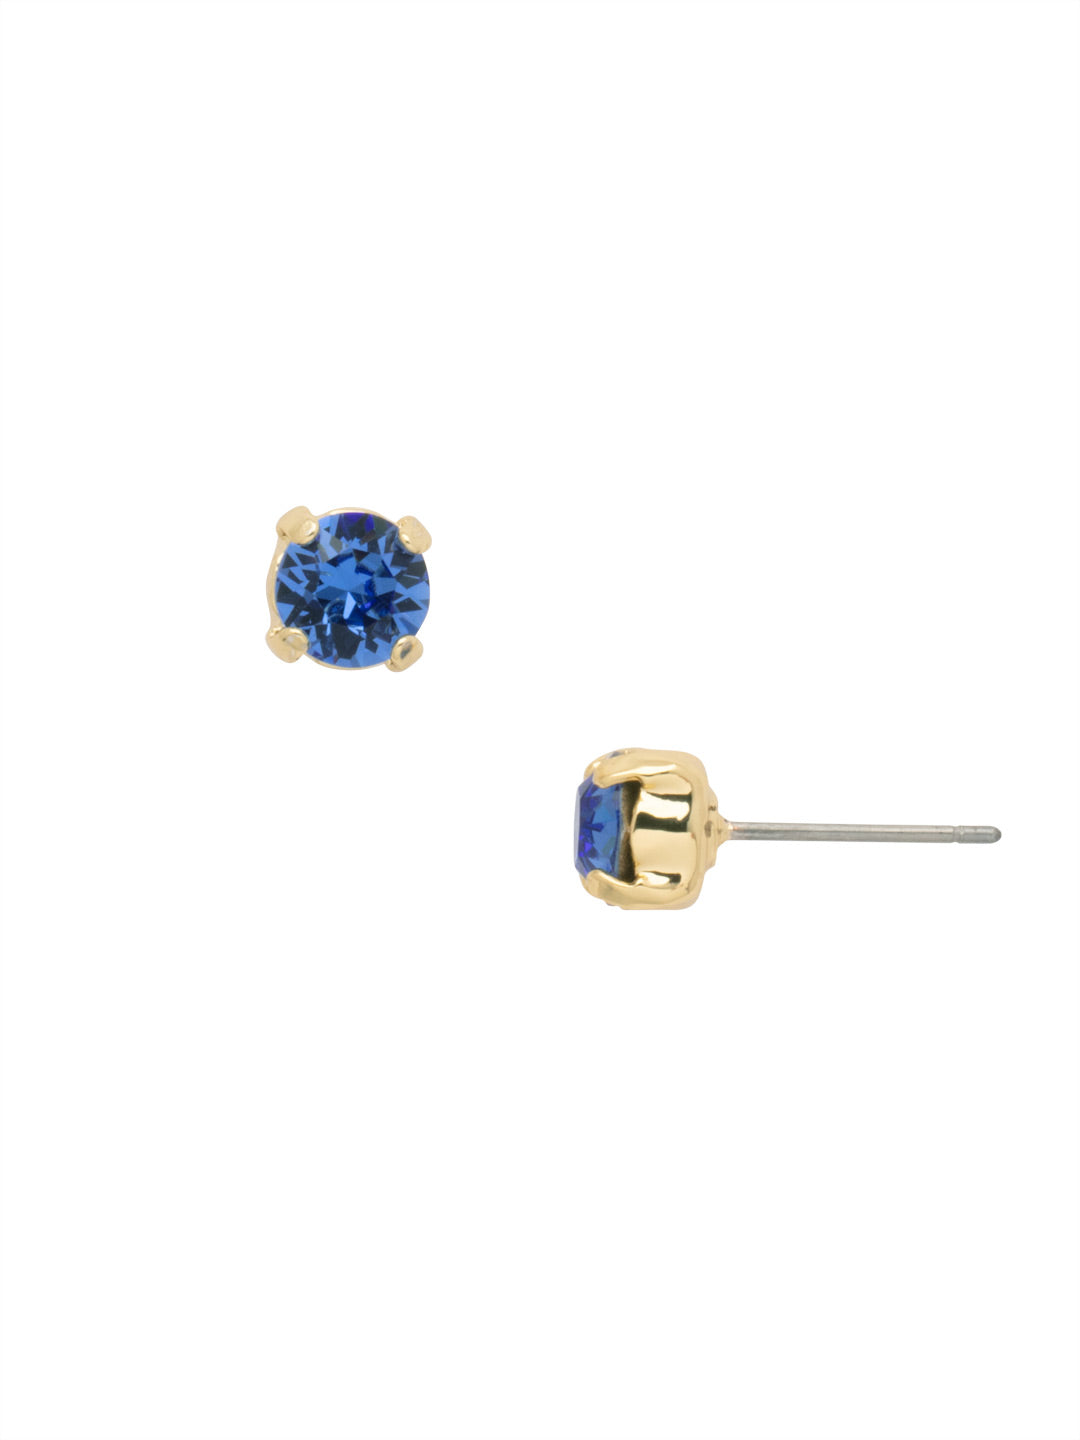 Jayda Stud Earrings - EDN32BGSAP - <p>The Jayda Stud Earrings are the perfect every day wardrobe staple. A round crystal nestles perfectly in a metal plated post with four prongs. </p><p>Need help picking a stud? <a href="https://www.sorrelli.com/blogs/sisterhood/round-stud-earrings-101-a-rundown-of-sizes-styles-and-sparkle">Check out our size guide!</a> From Sorrelli's Sapphire collection in our Bright Gold-tone finish.</p>